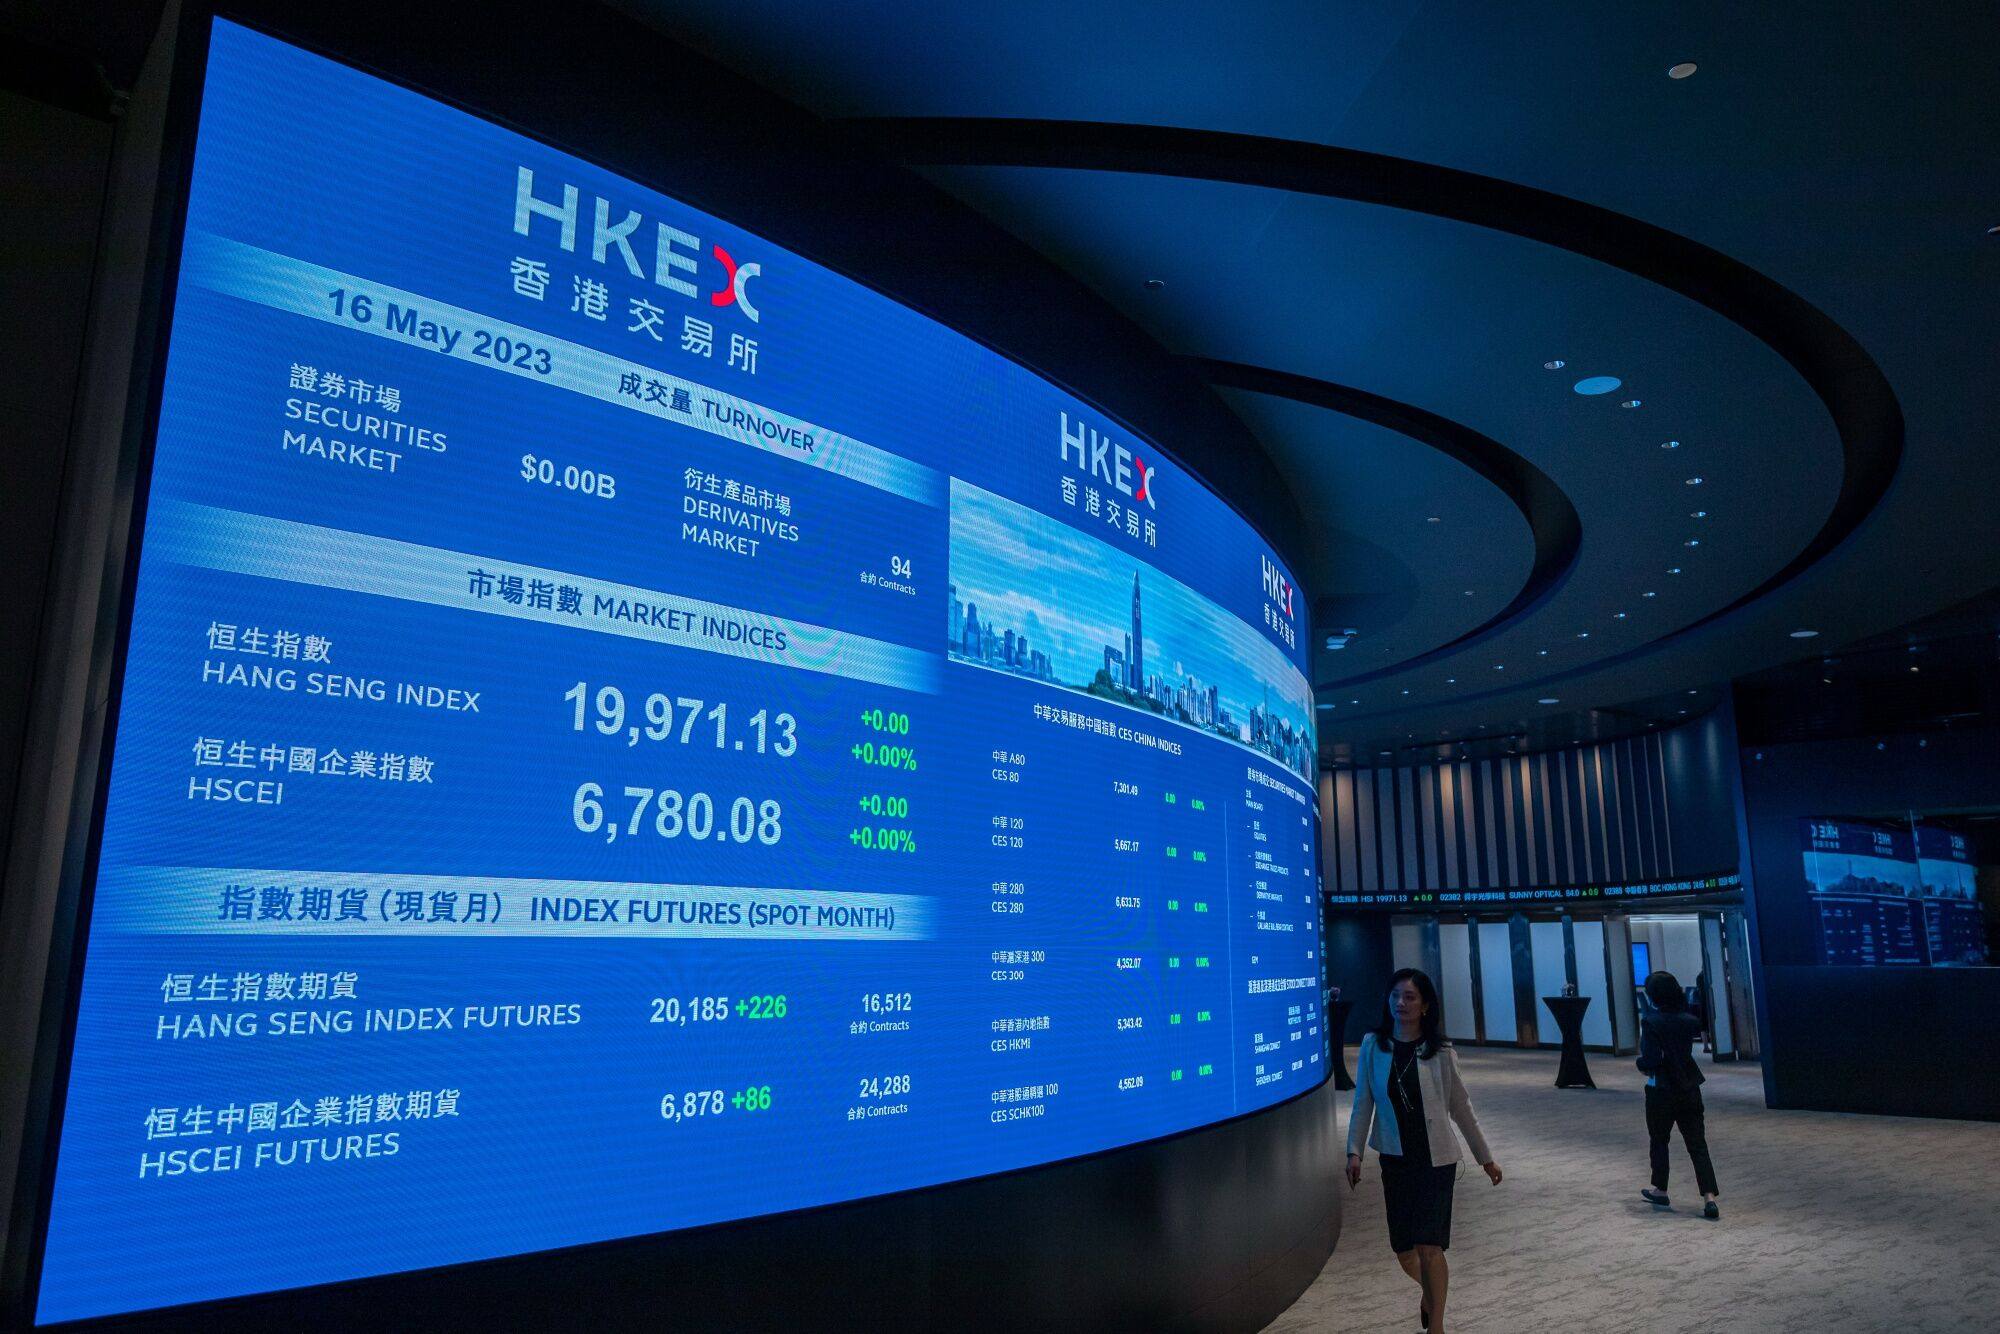 A screen shows various index figures in Connect Hall at Hong Kong Exchanges and Clearing in Hong Kong on May 16, 2023. Photo: Bloomberg